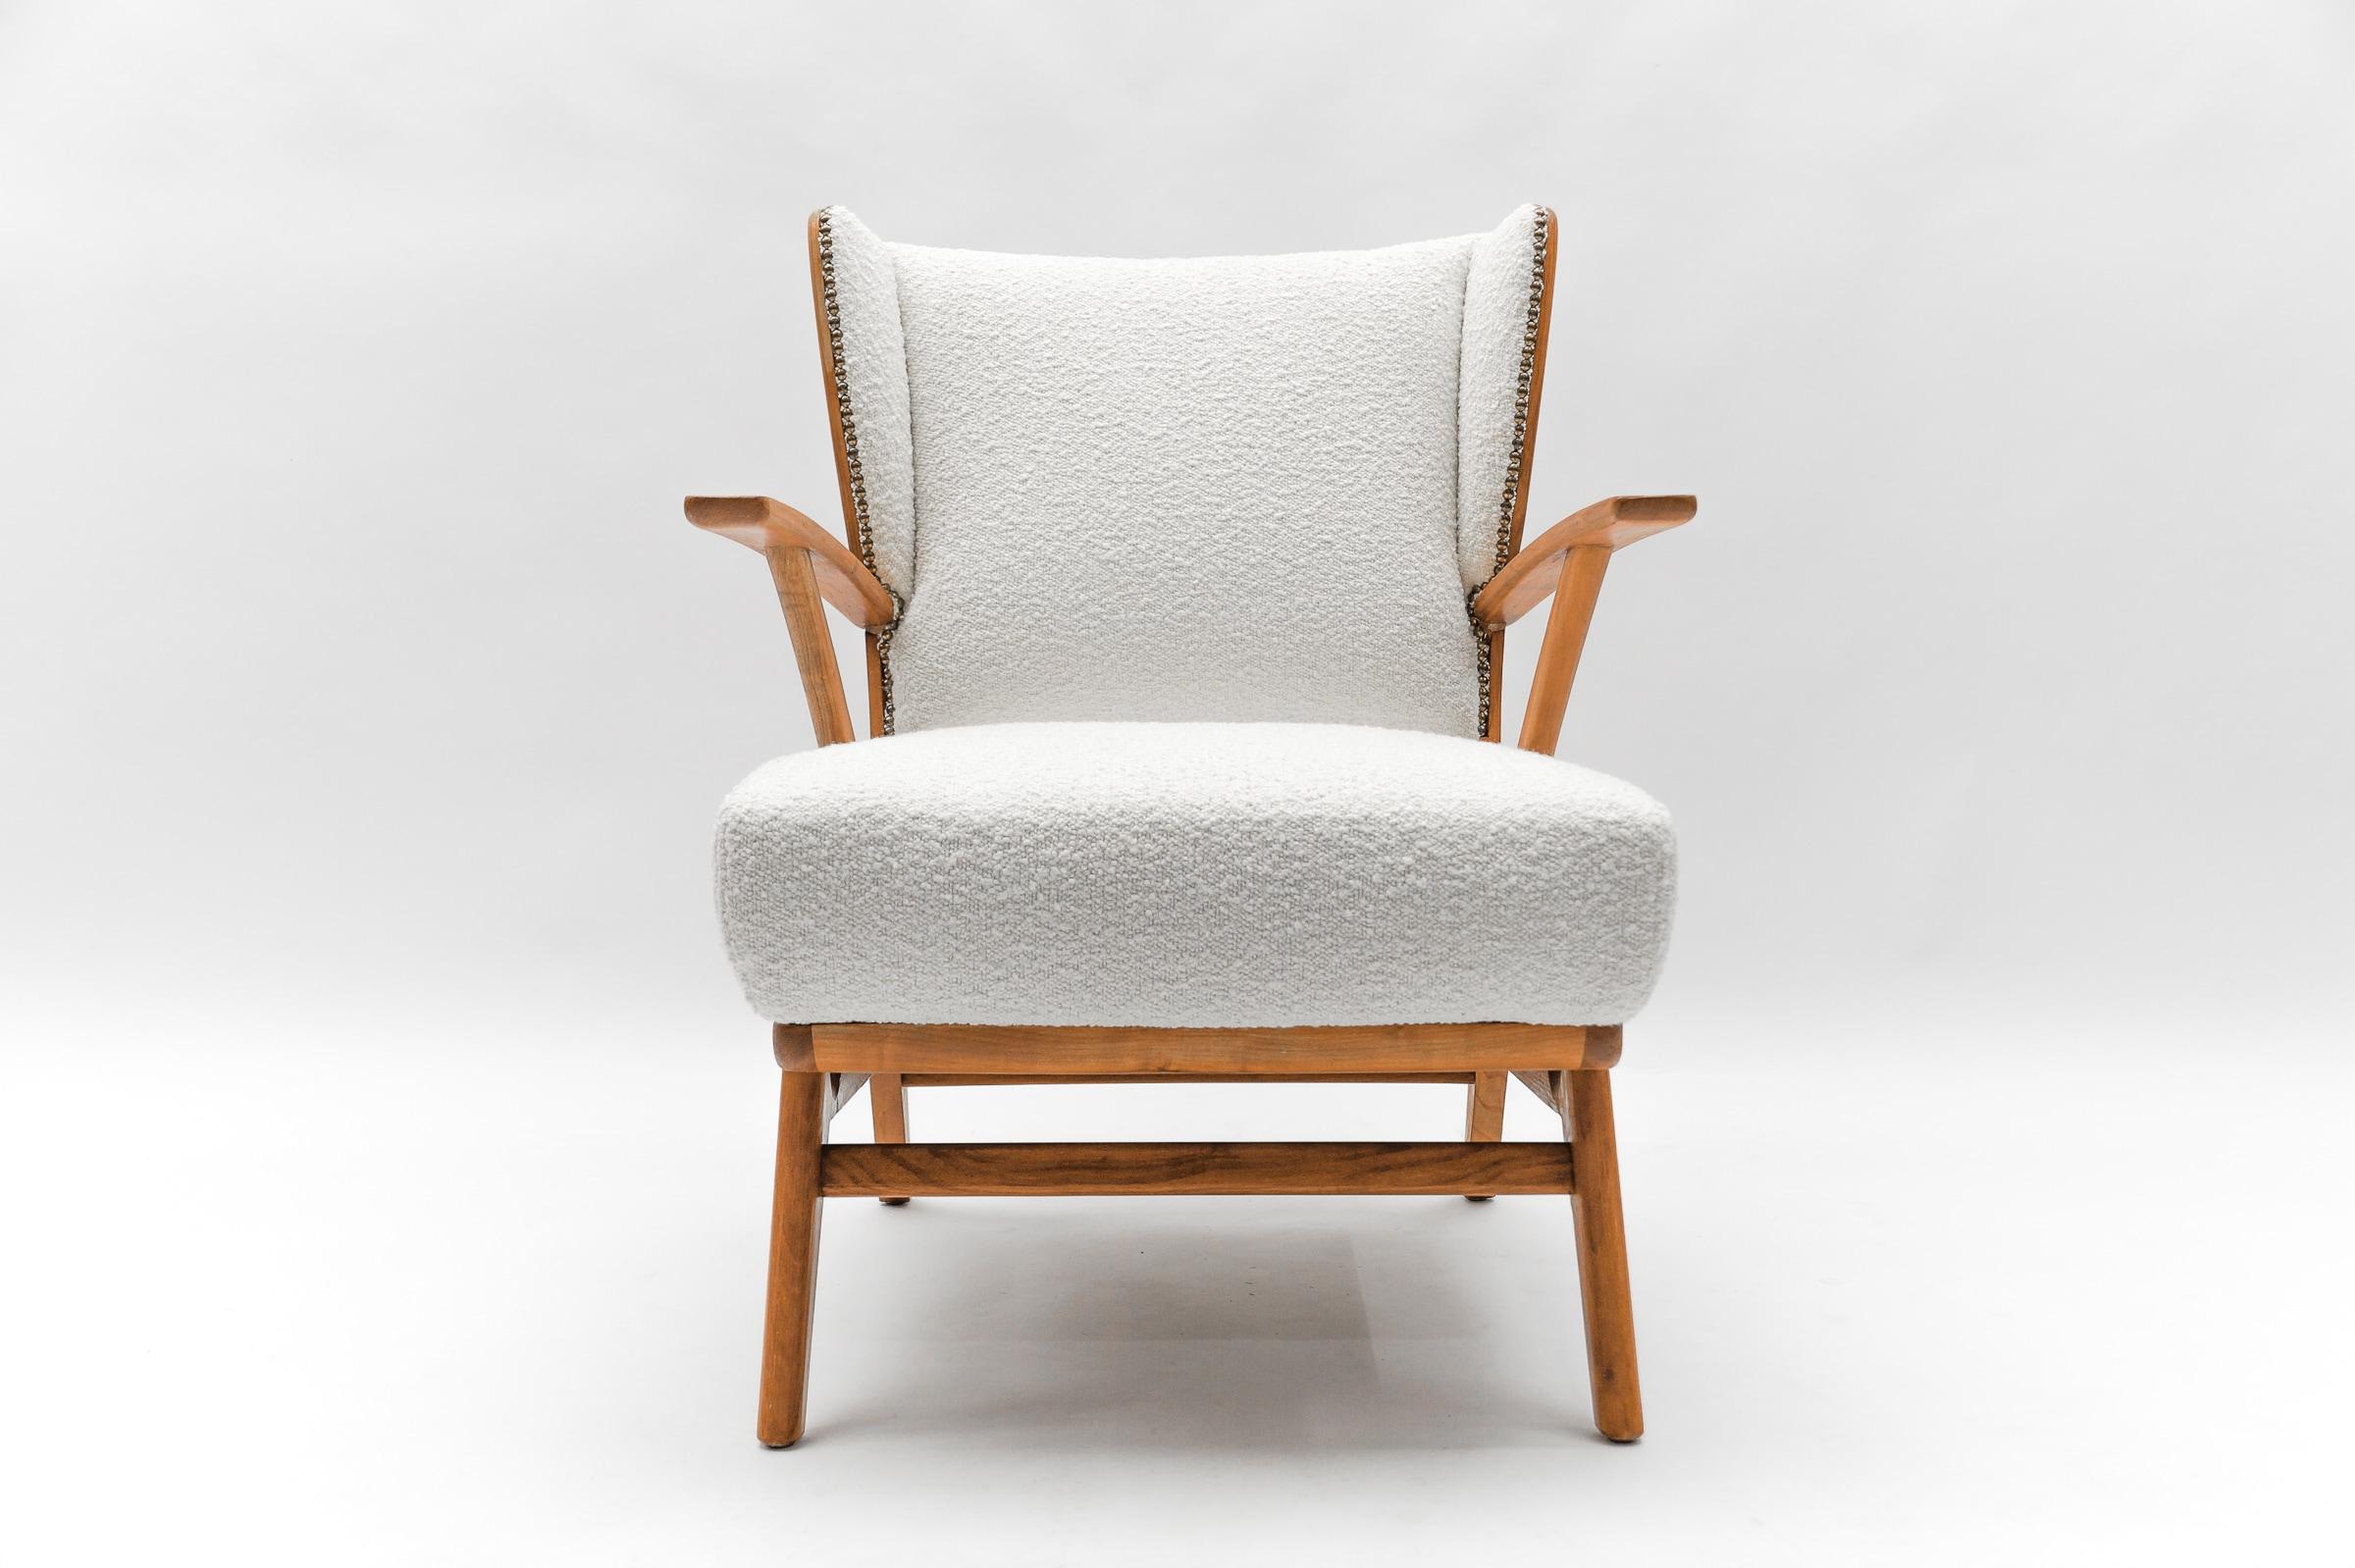 Awesome armchairs.

New upholstery in white Boucle.

We have a second identical chair here on the platform.
